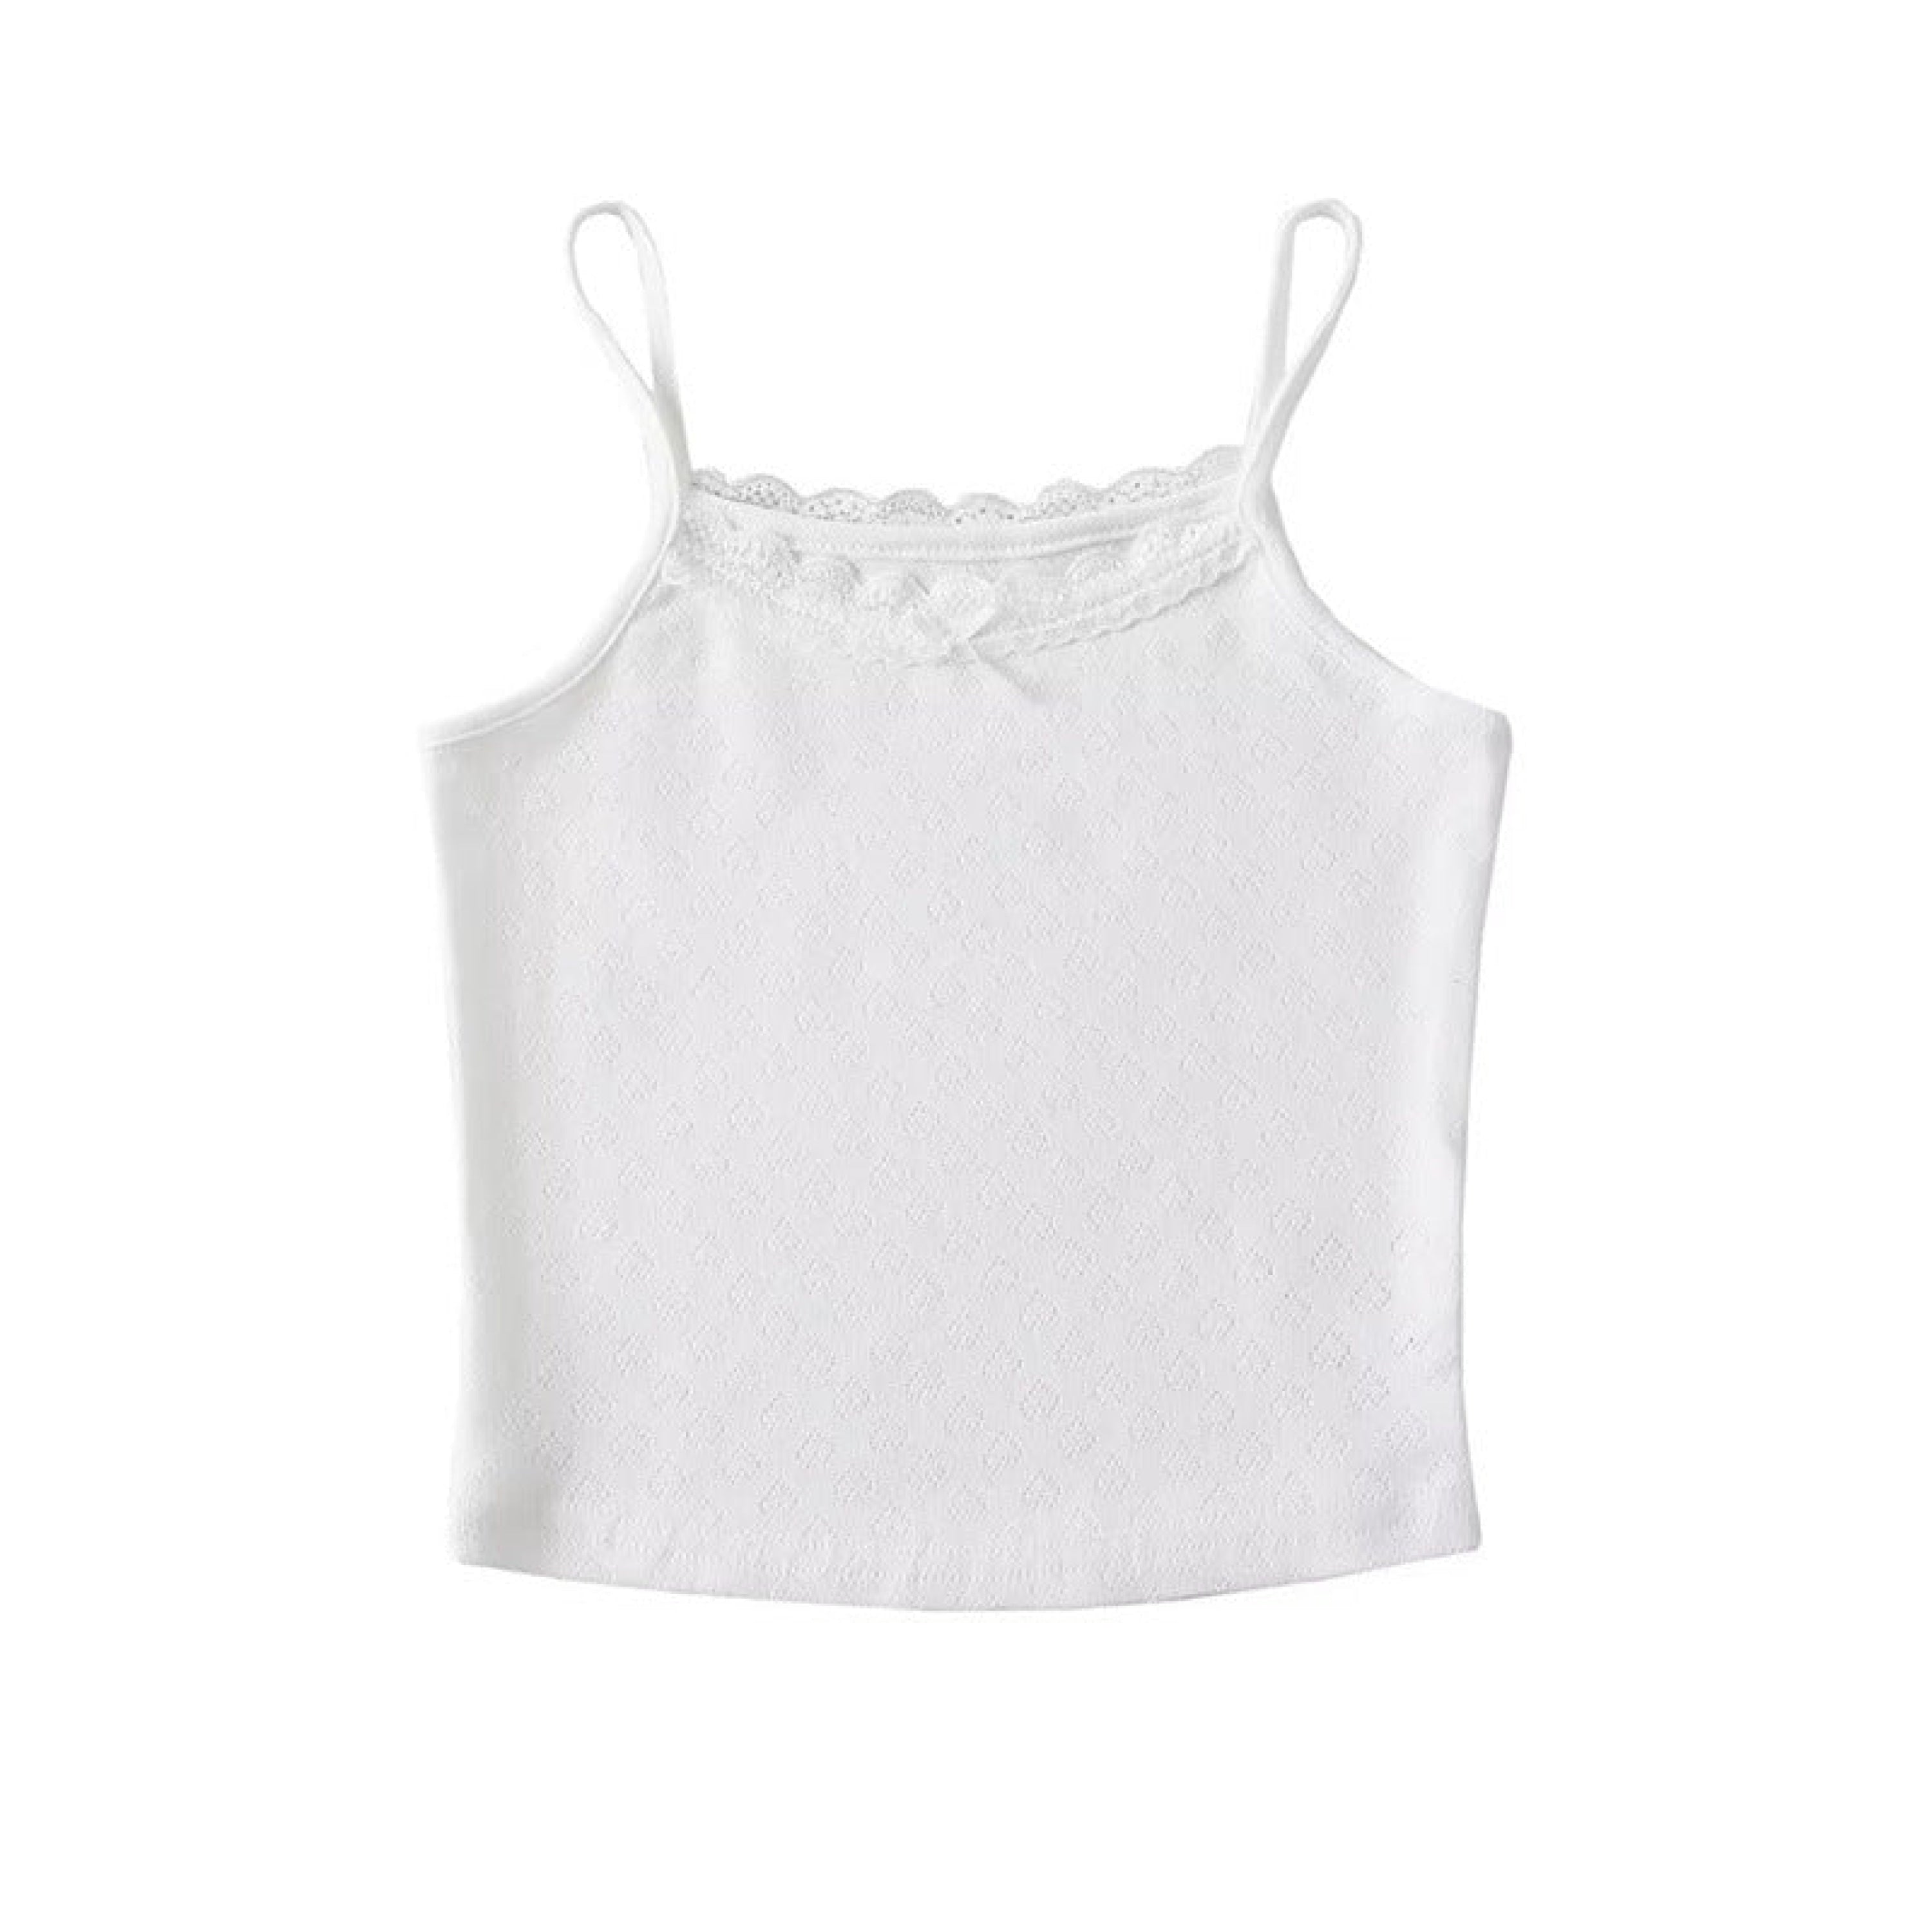 Floral Lace Padded Cami Tank / White, Best Stylish Bedding